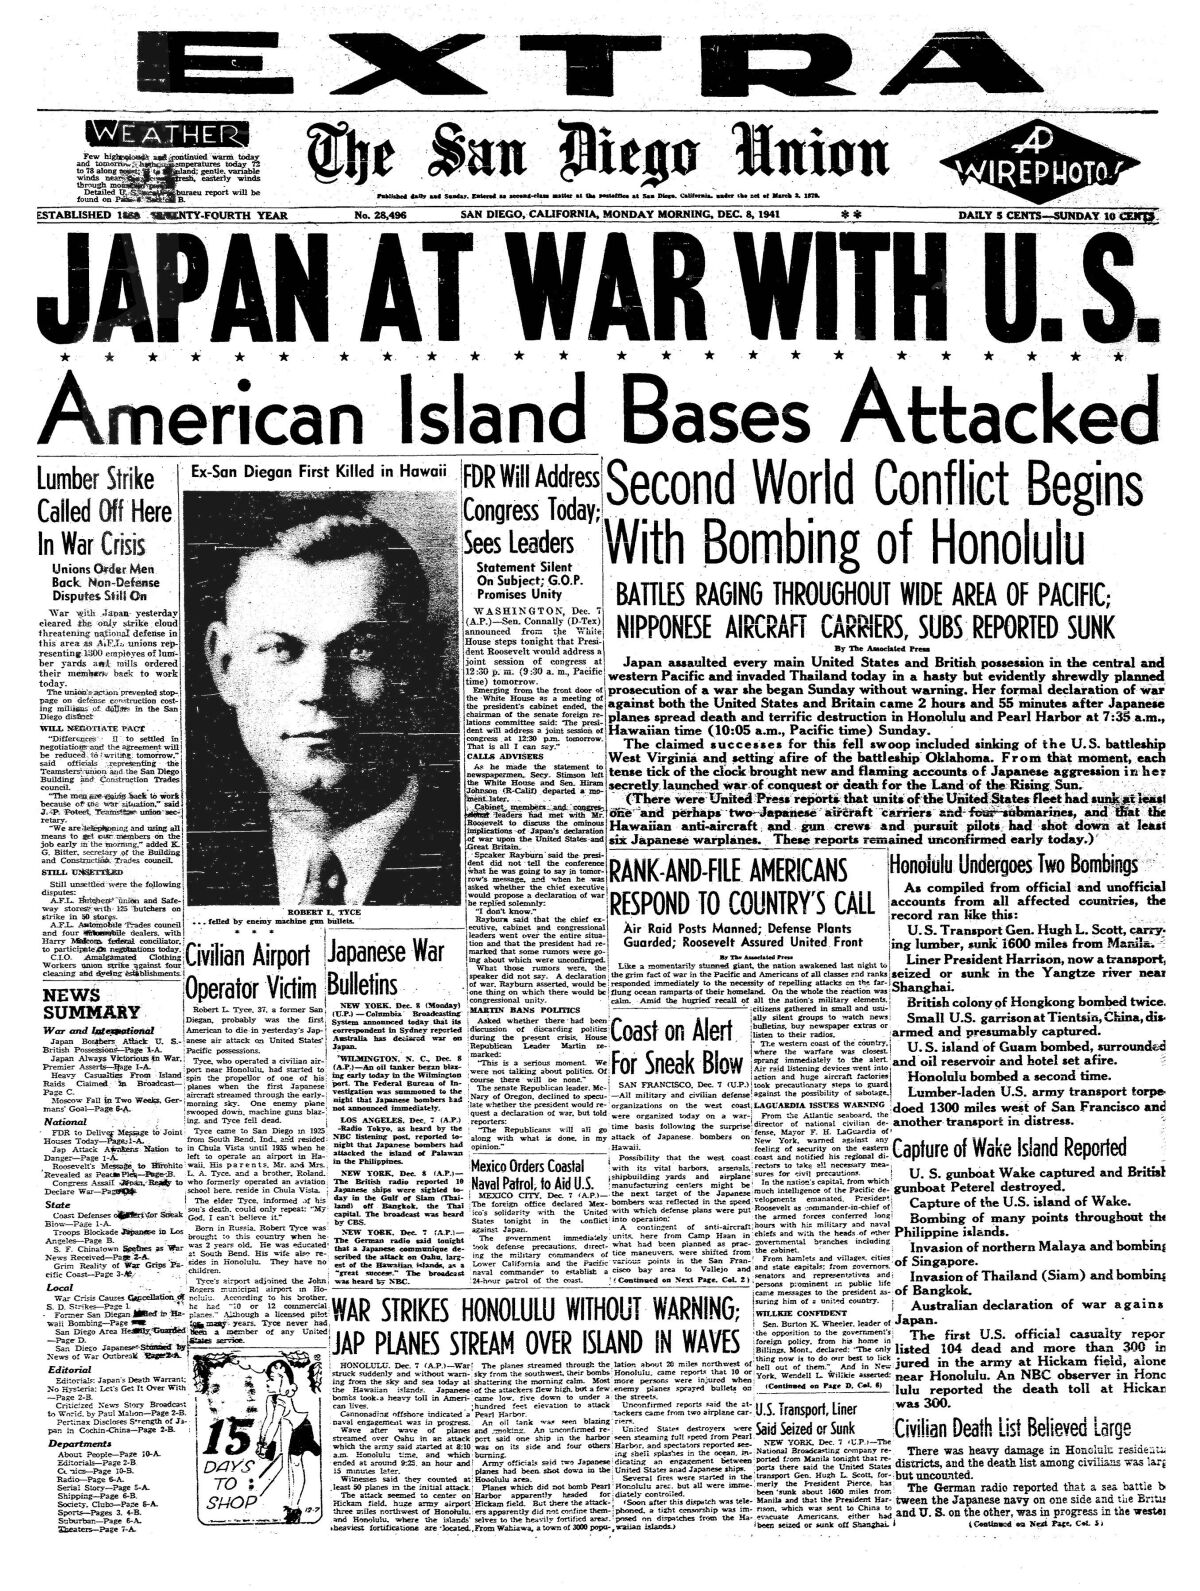 December 8, 1941 front page